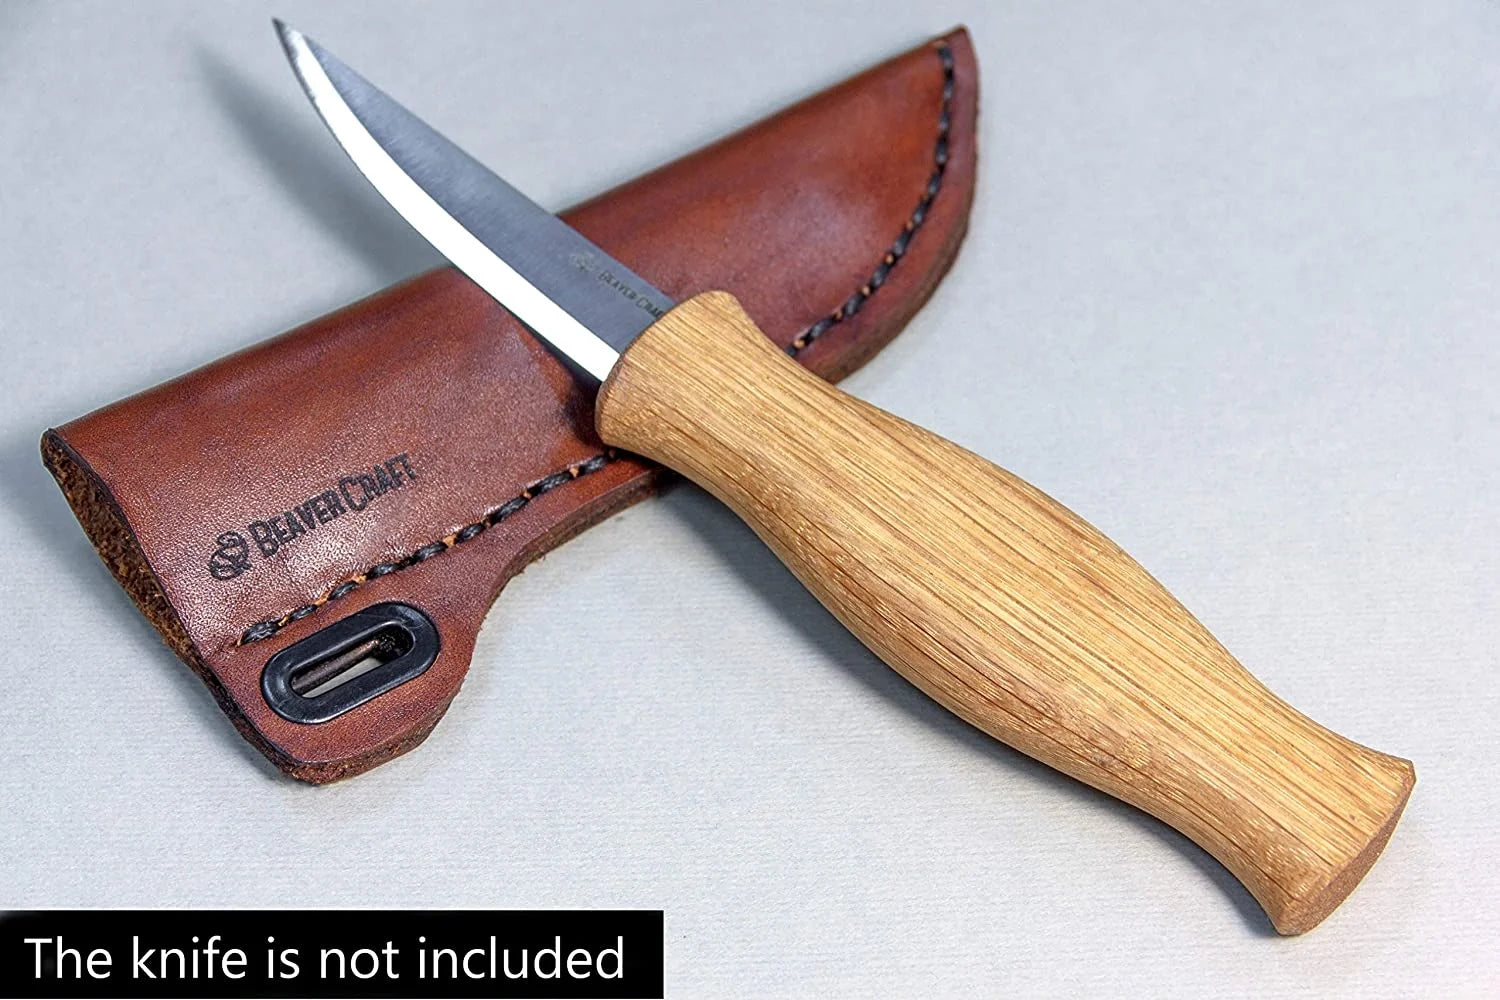 BeaverCraft Sloyd Knife C4S 3.14 inch Wood Carving Sloyd Knife with Leather Sheath for Whittling and Roughing for Beginners and Profi Durable High